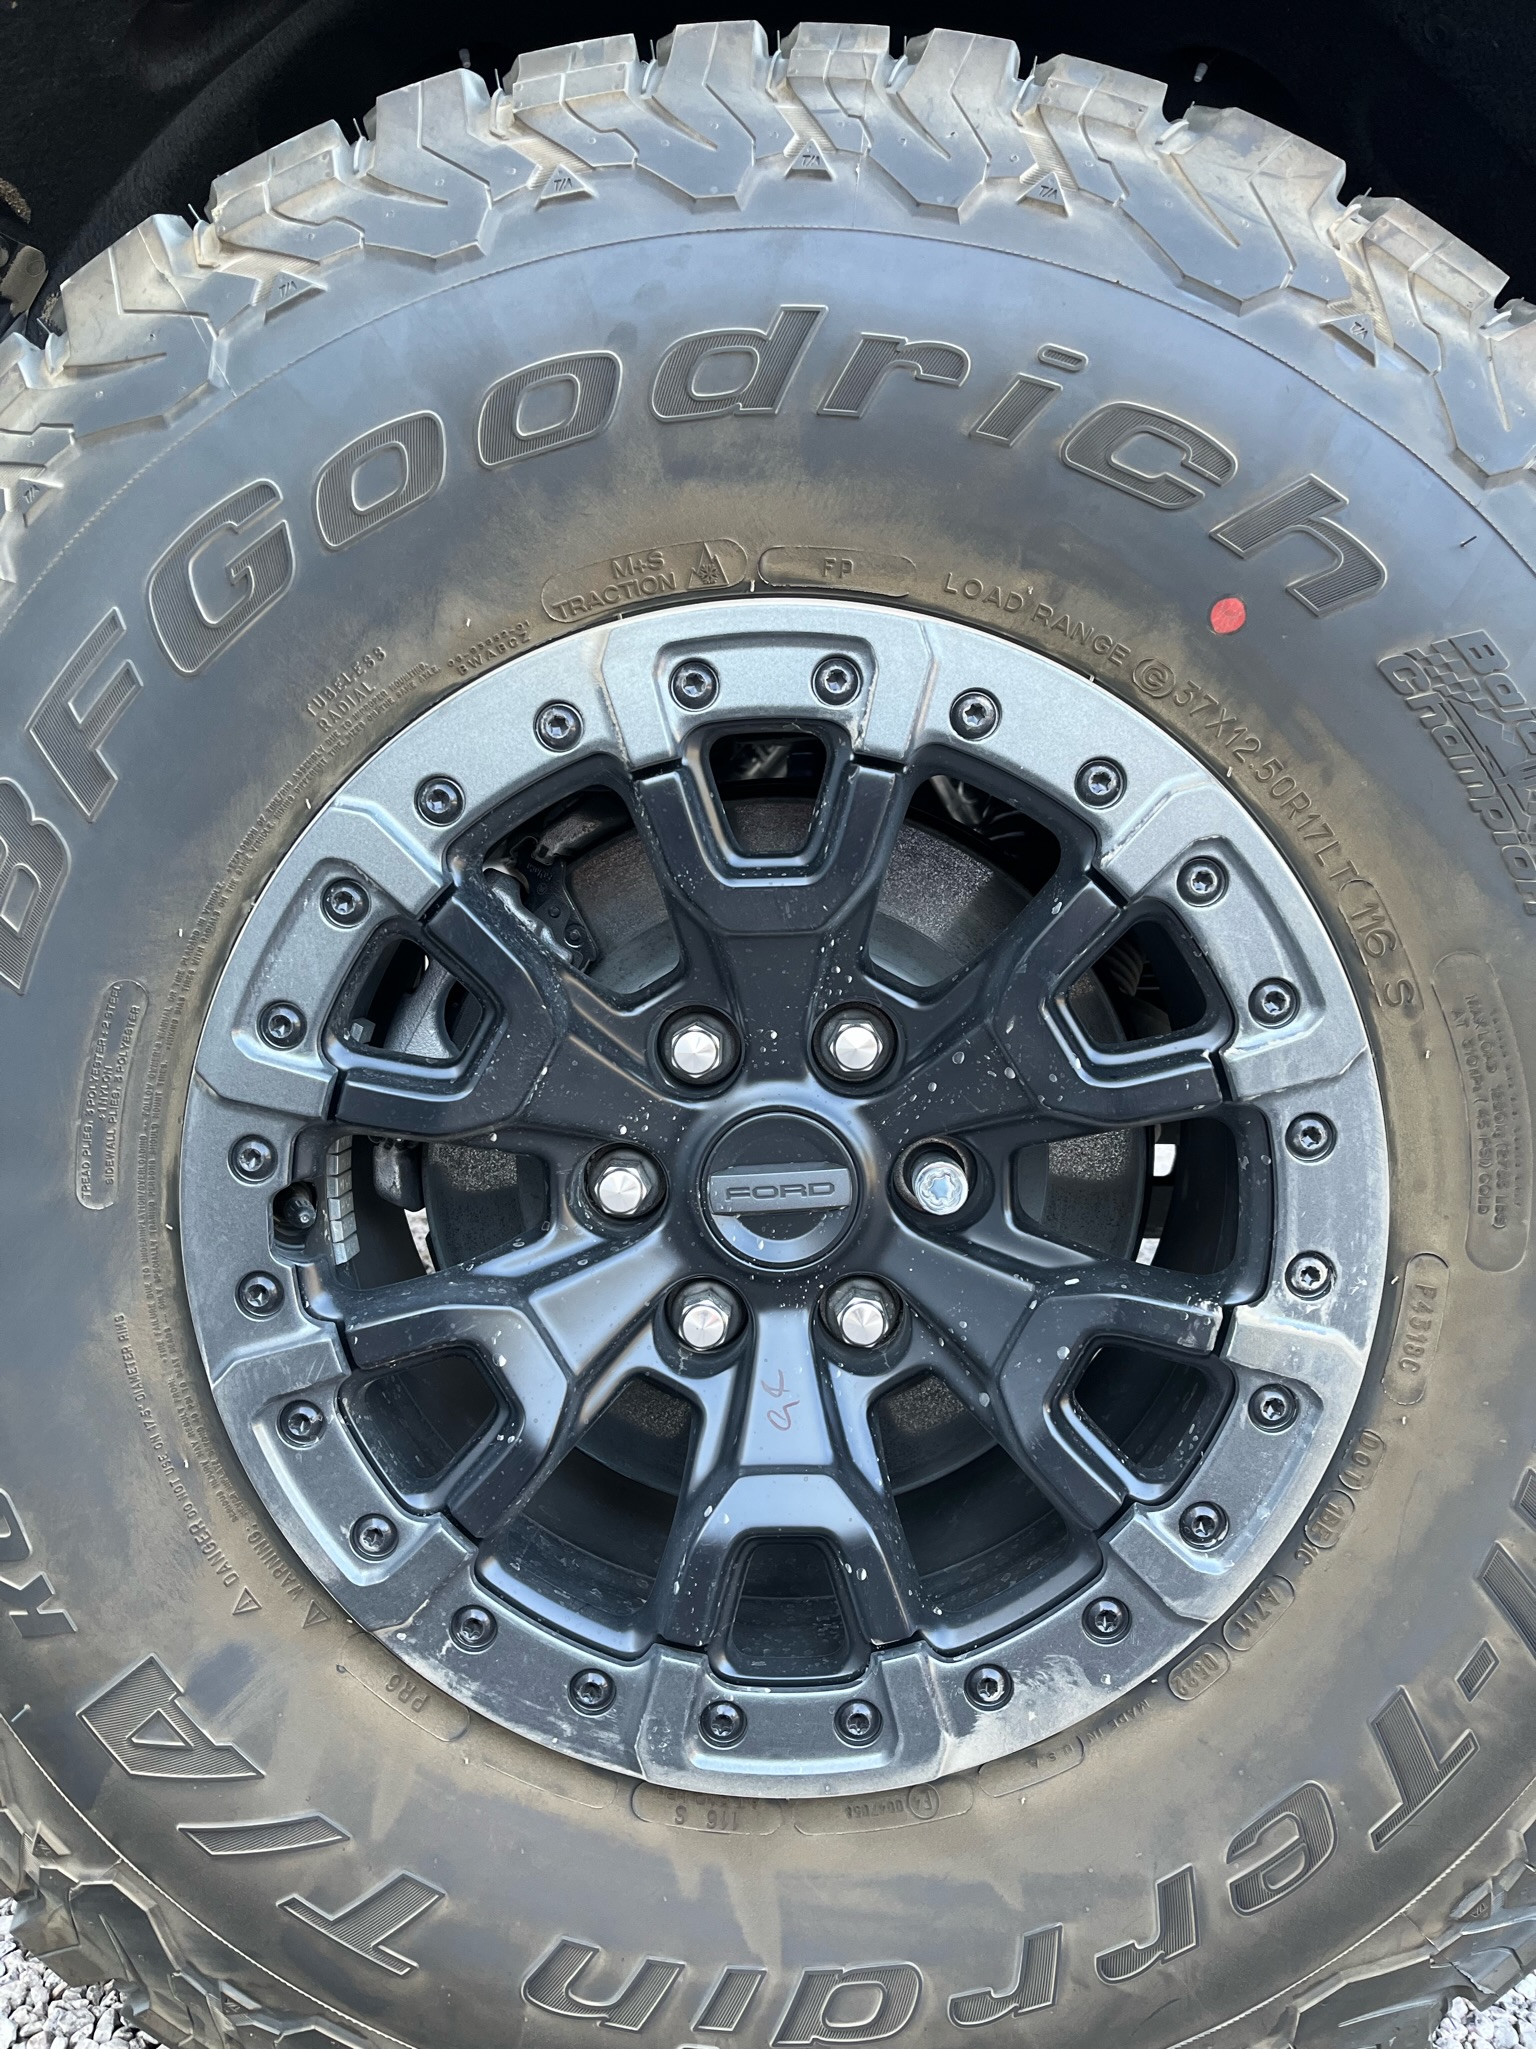 Bronco Bronco Raptor Forged Beadlock Rings - installed and disappointed in fit 587A84B6-5122-48F6-923B-937B22181182